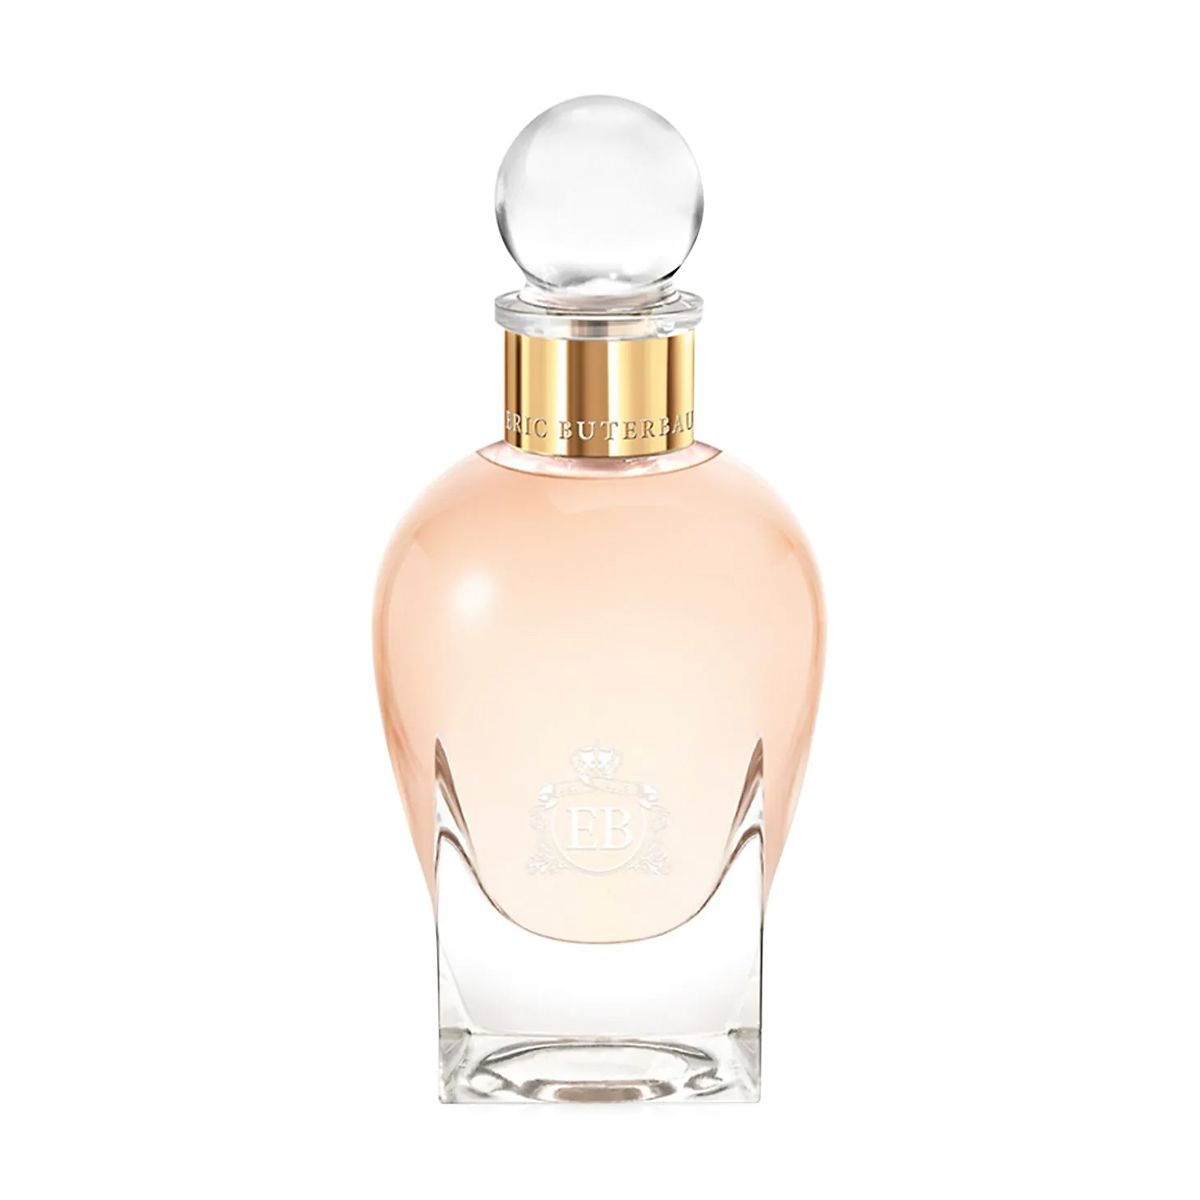 The 15 Best Tuberose Perfumes That Smell So Sophisticated | Who What Wear